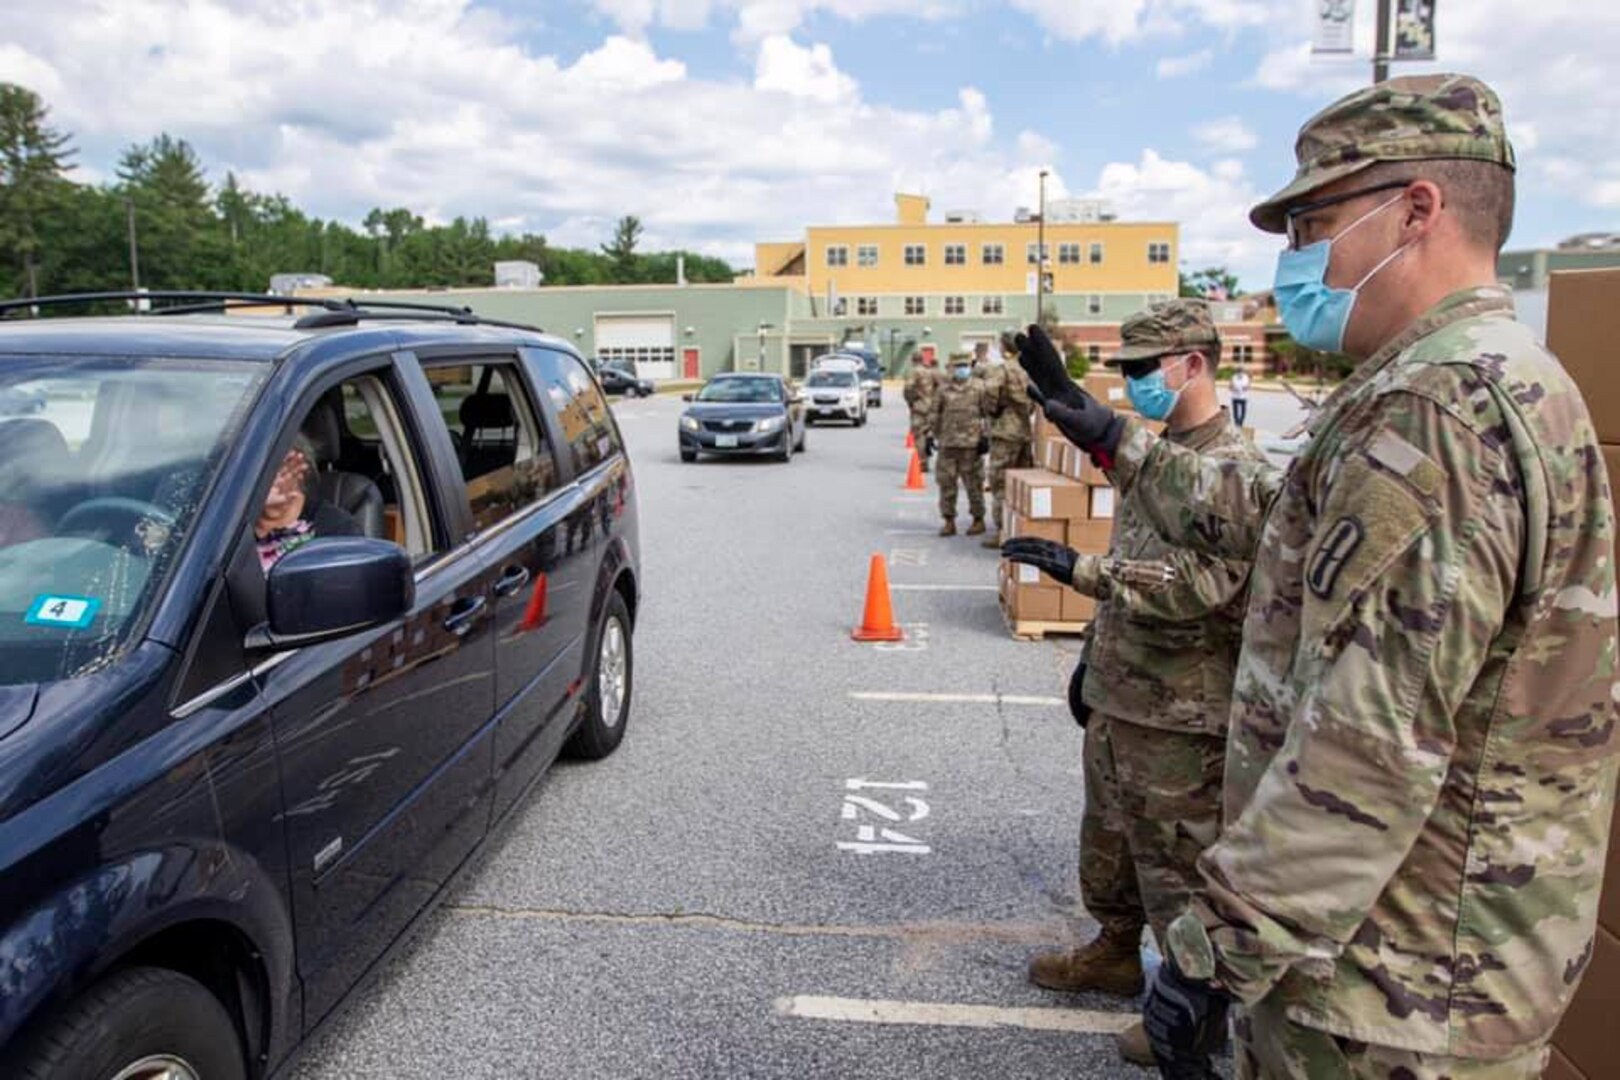 From rear, Pvt. Todd Greeson, an ammunition specialist with 3643rd Brigade Support Battalion, and Pfc. Kevin Blackstone, a radar repair specialist with 197th Field Artillery Brigade, wave to a family after loading their vehicle at a mobile pantry June 12 in North Conway.